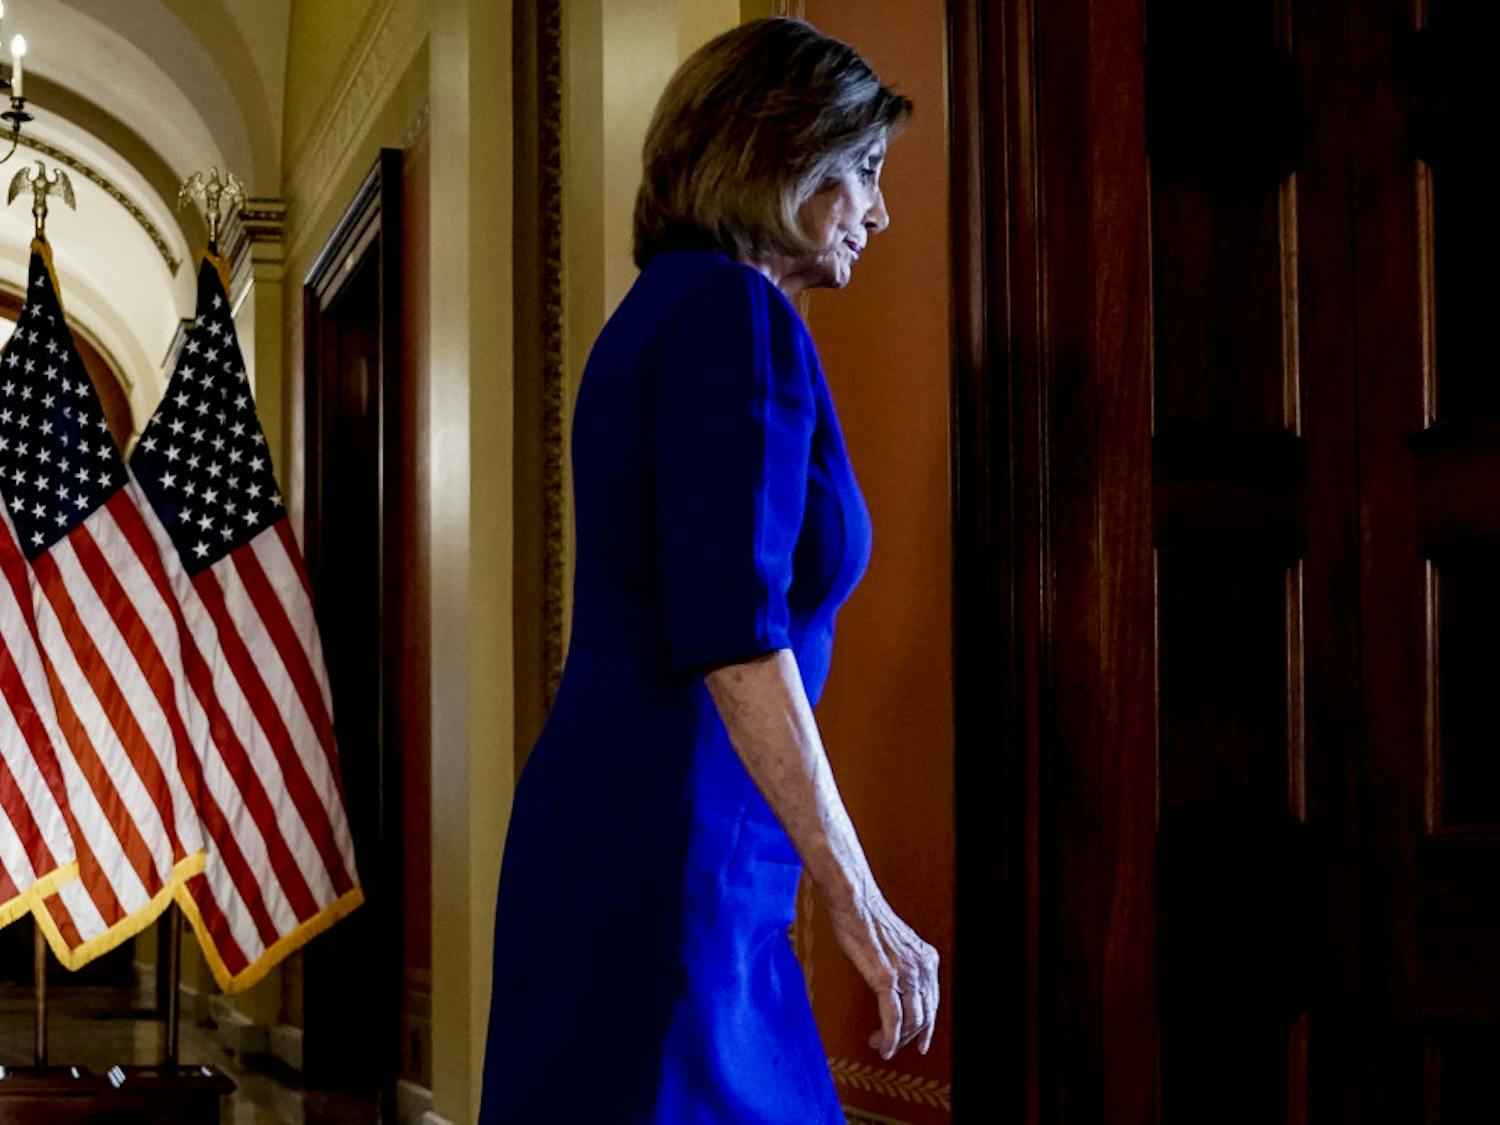 House Speaker Nancy Pelosi, D-Calif., steps away from a podium after reading a statement announcing a formal impeachment inquiry into President Donald Trump, on Capitol Hill in Washington, Tuesday, Sept. 24, 2019. (AP Photo/Andrew Harnik)